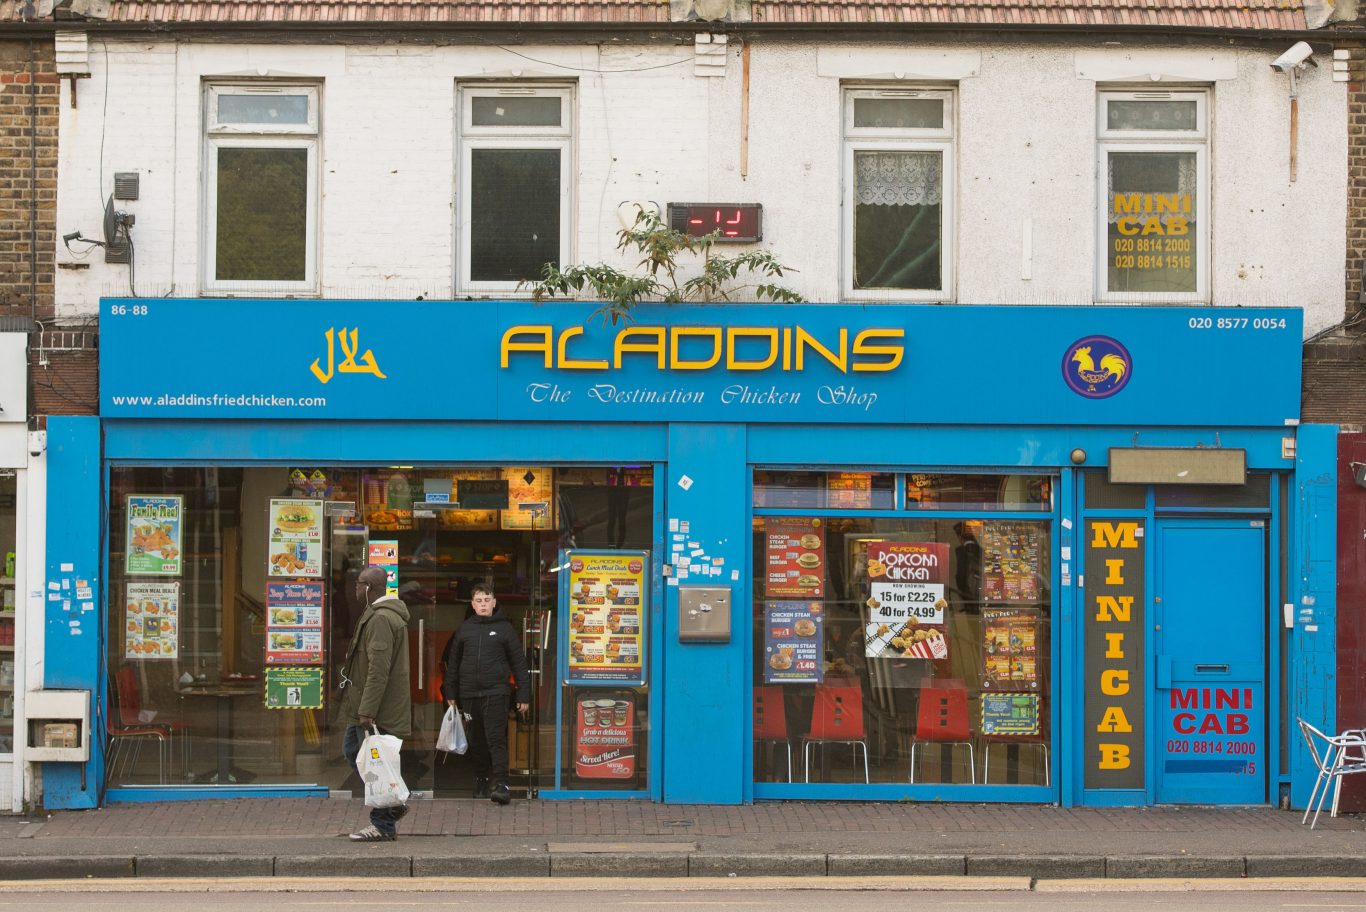 Aladdins chicken shop in Hounslow, west London after one of its employees, Yahyah Farroukh, was arrested on Saturday (Dominic Lipinski/PA)